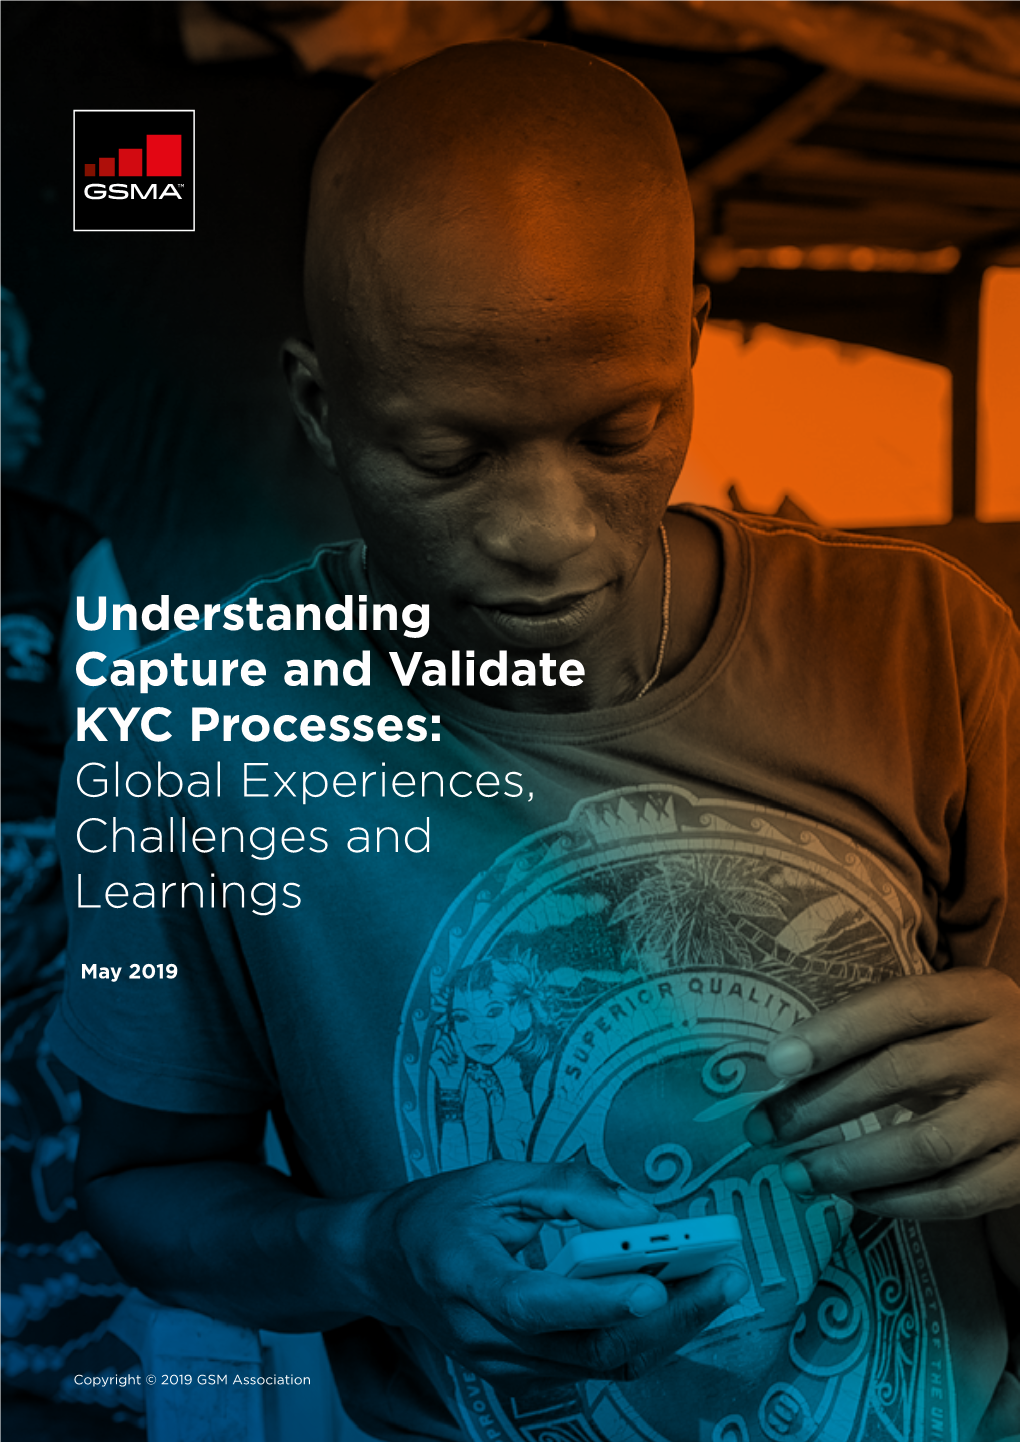 Understanding Capture and Validate KYC Processes: Global Experiences, Challenges and Learnings